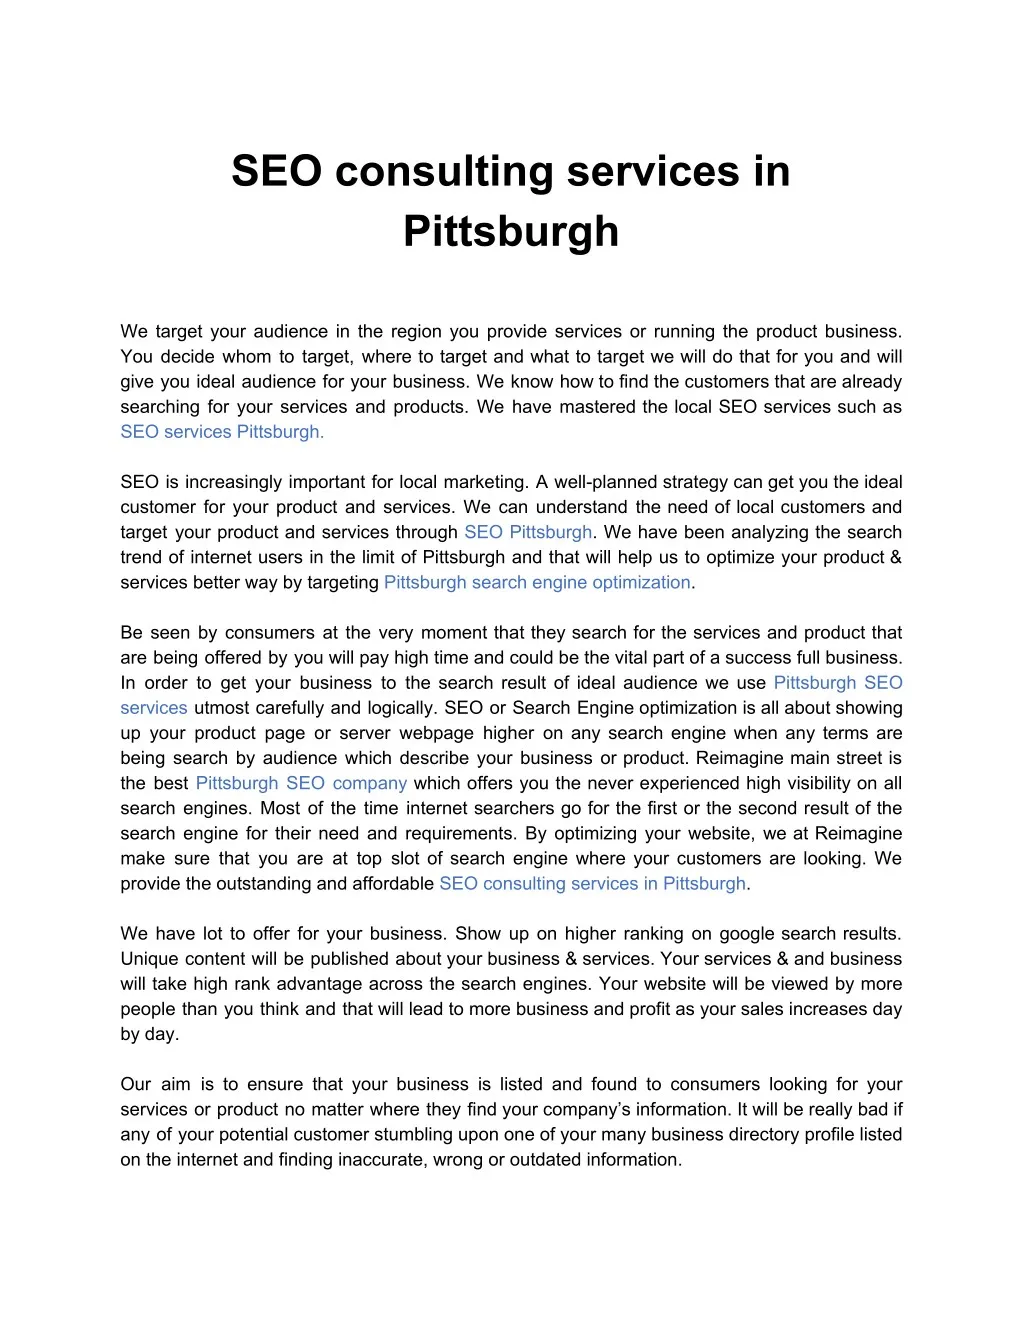 seo consulting services in pittsburgh n.